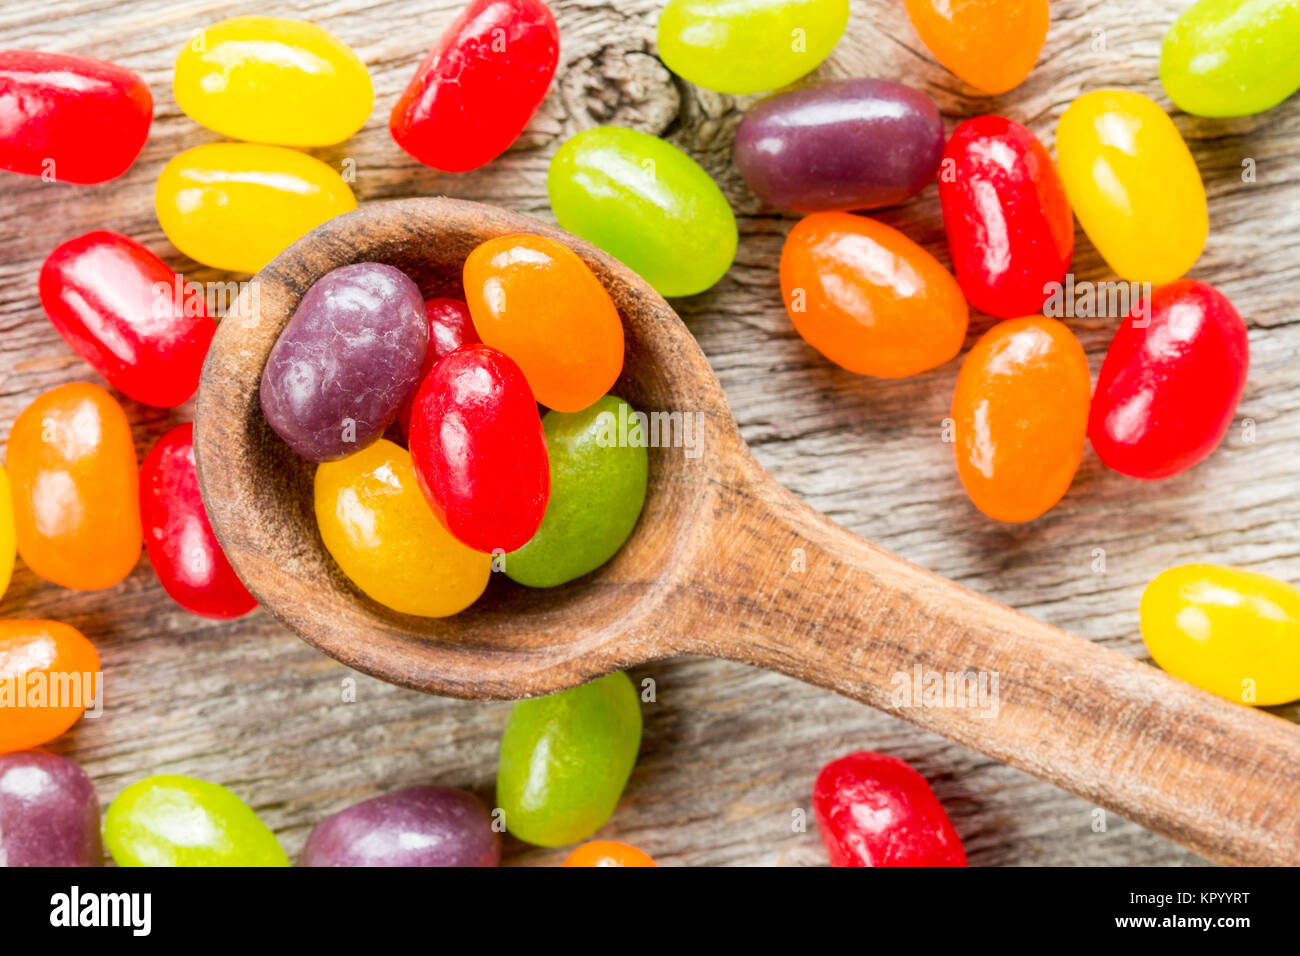 Spoon with colorful candies Stock Photo